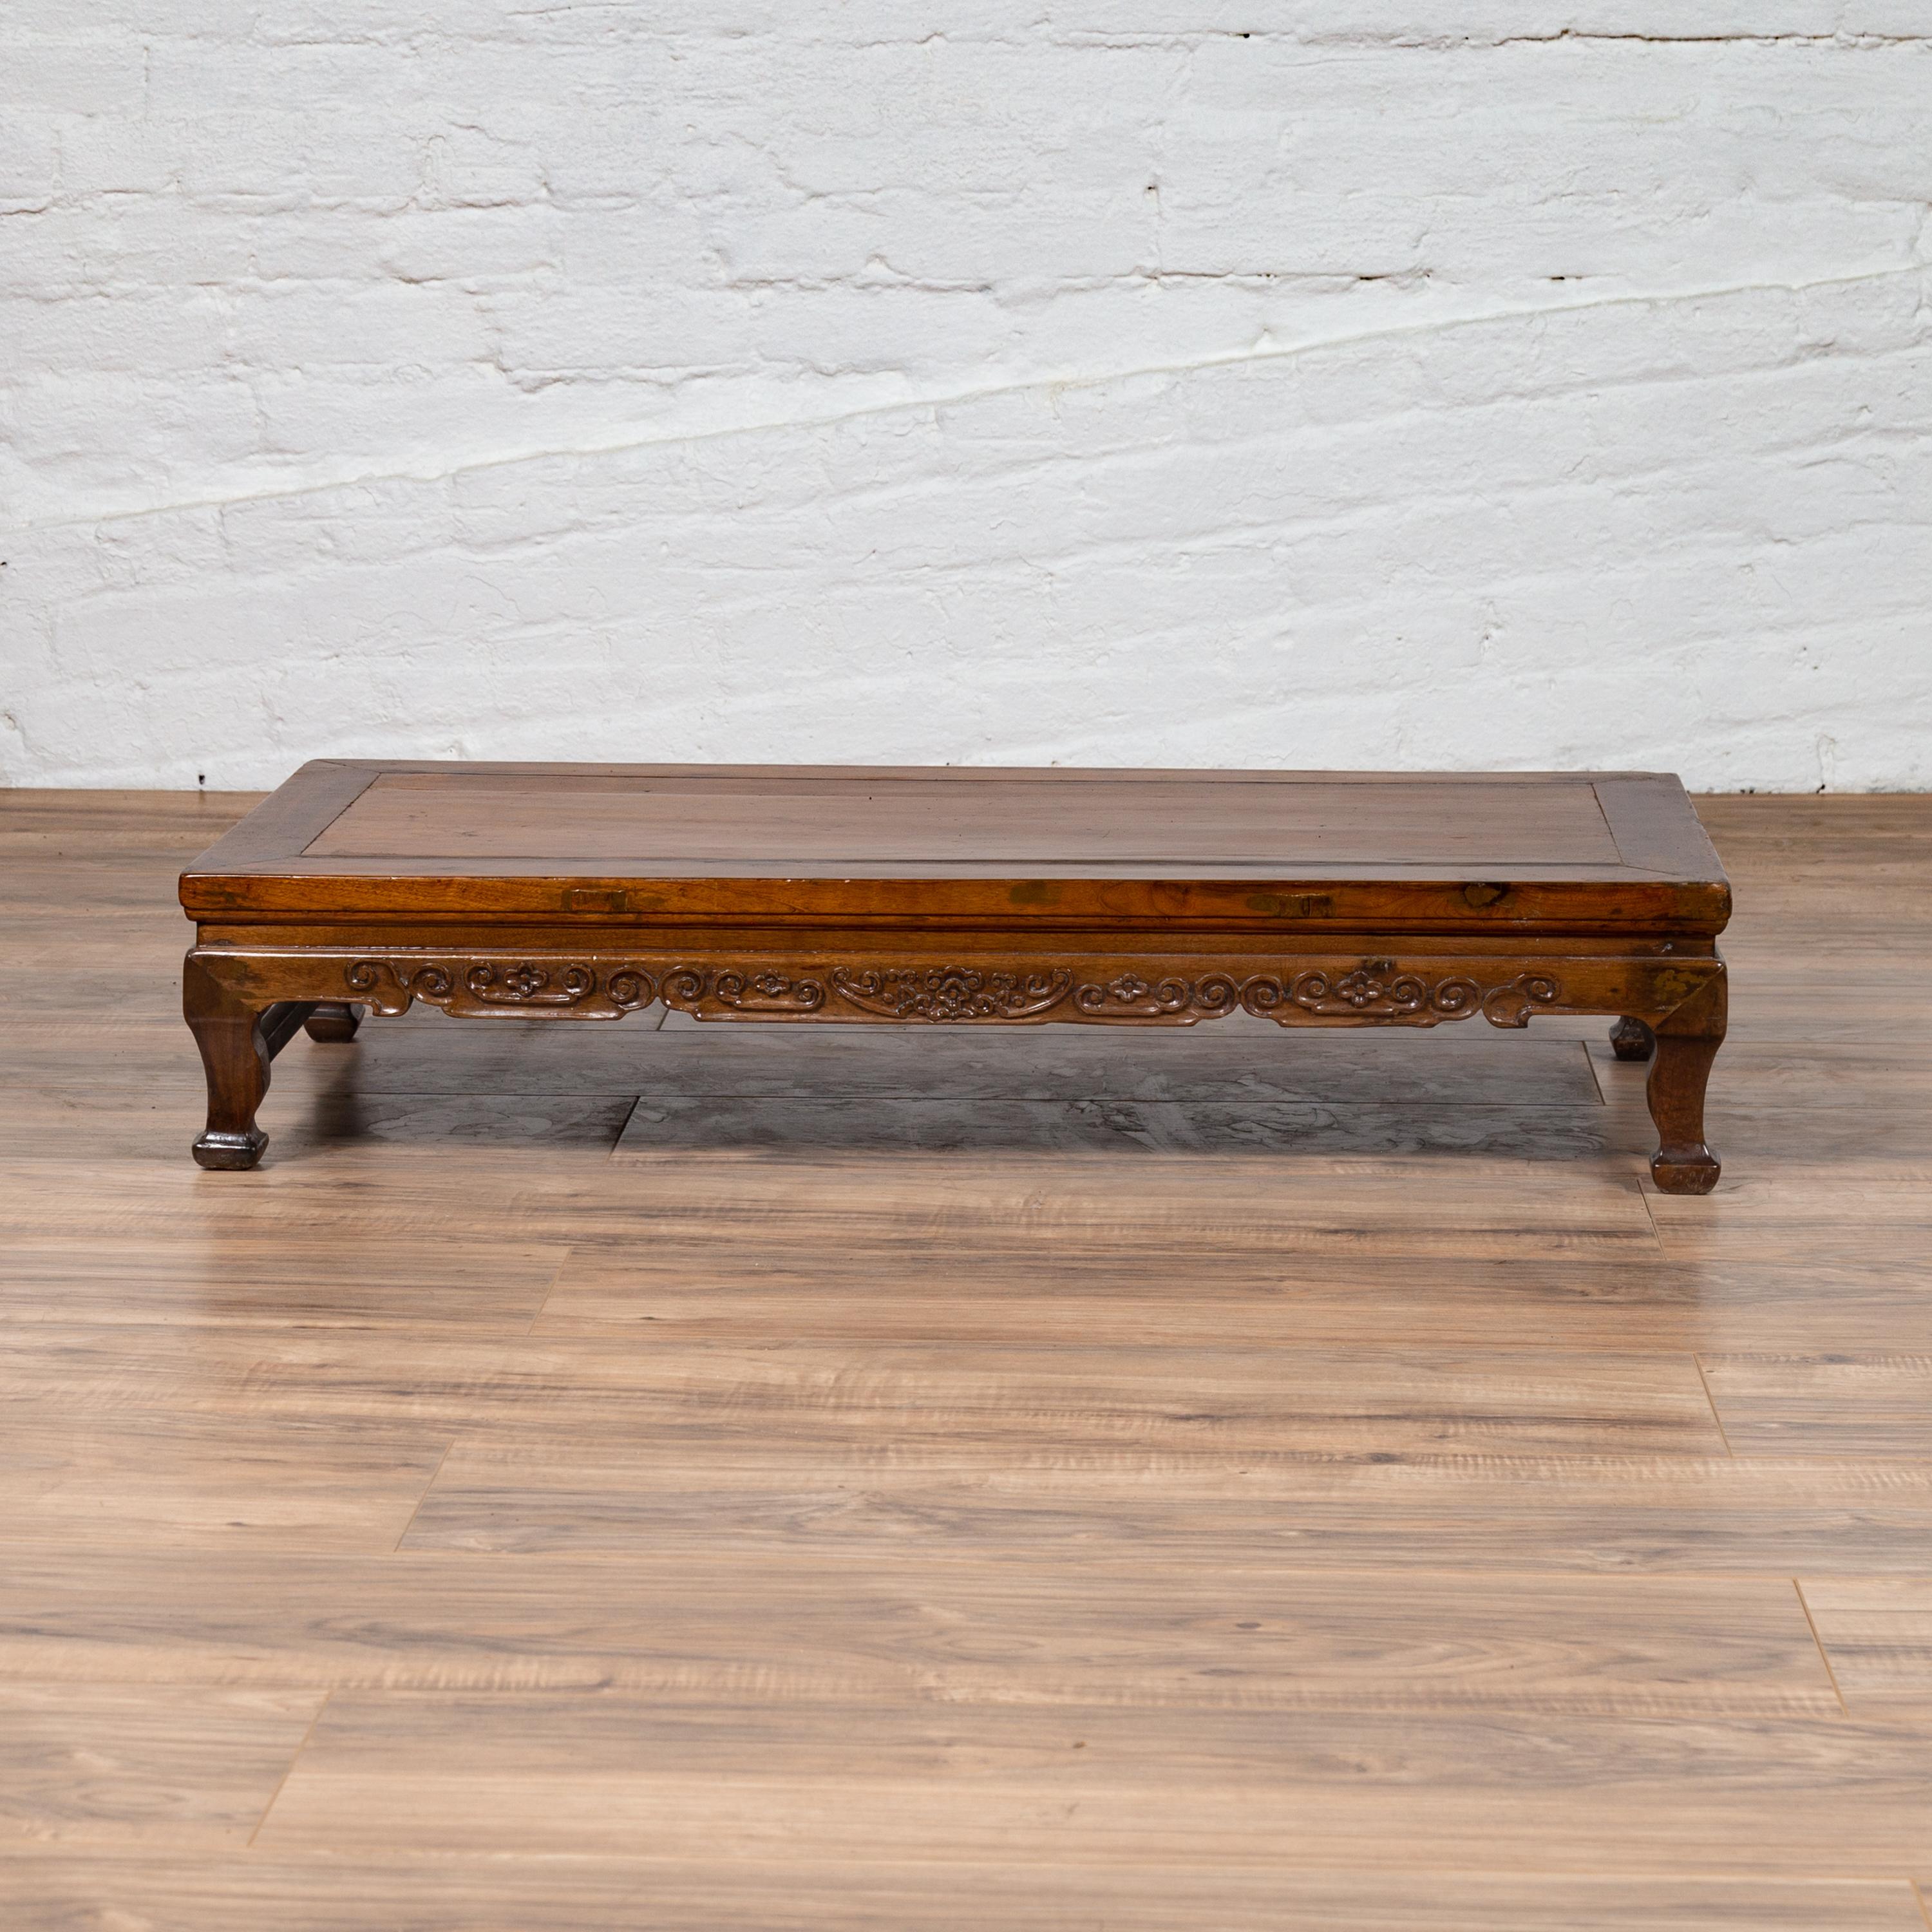 A Chinese antique elmwood low prayer table from the early 20th century, with carved apron and unusual feet. Born in China during the early years of the 20th century, this low prayer table features a rectangular top with central board, sitting above